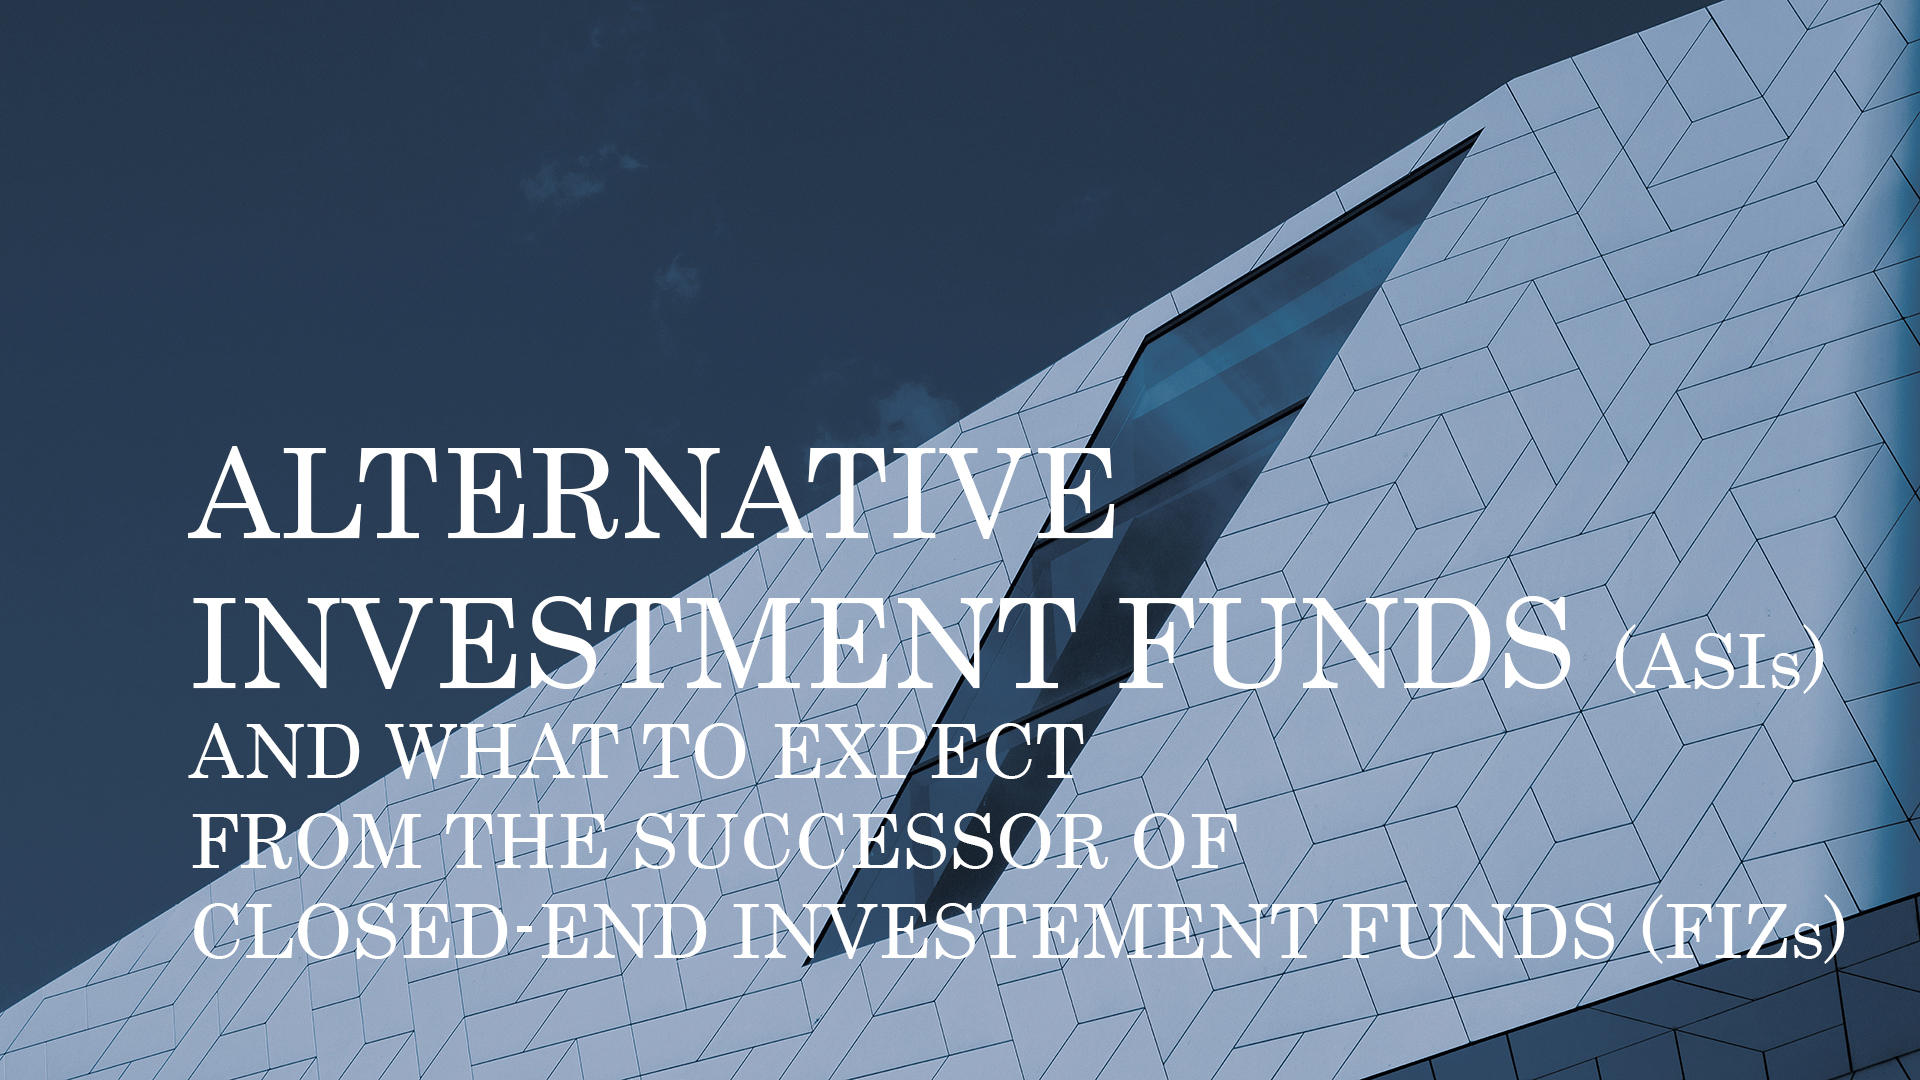 ALTERNATIVE INVESTMENT FUNDS (AIFs) AND WHAT TO EXPECT FROM THE SUCCESSOR OF CLOSED-END INVESTEMENT FUNDS (FIZs)